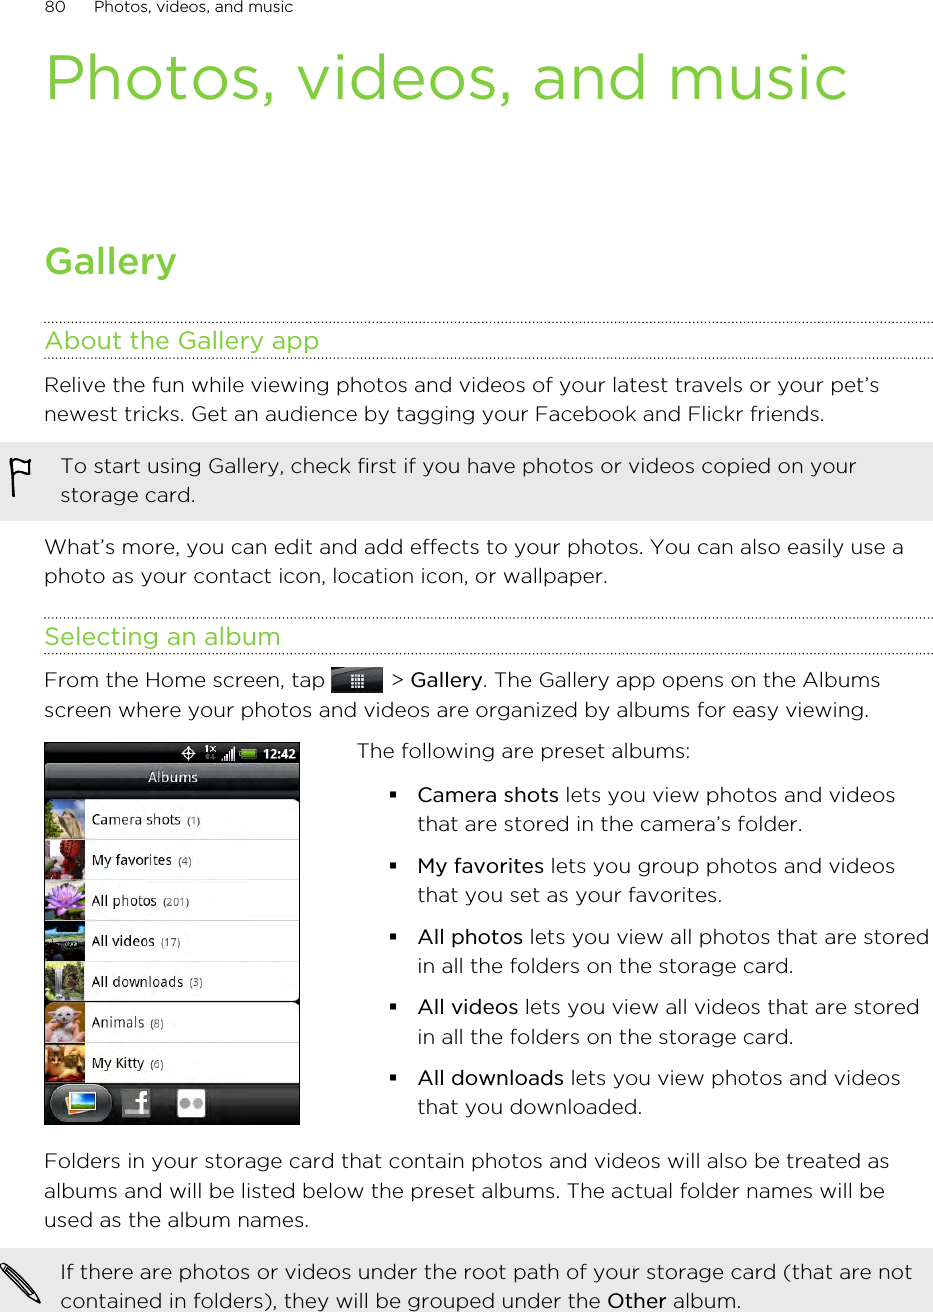 Photos, videos, and musicGalleryAbout the Gallery appRelive the fun while viewing photos and videos of your latest travels or your pet’snewest tricks. Get an audience by tagging your Facebook and Flickr friends.To start using Gallery, check first if you have photos or videos copied on yourstorage card.What’s more, you can edit and add effects to your photos. You can also easily use aphoto as your contact icon, location icon, or wallpaper.Selecting an albumFrom the Home screen, tap   &gt; Gallery. The Gallery app opens on the Albumsscreen where your photos and videos are organized by albums for easy viewing.The following are preset albums:§Camera shots lets you view photos and videosthat are stored in the camera’s folder.§My favorites lets you group photos and videosthat you set as your favorites.§All photos lets you view all photos that are storedin all the folders on the storage card.§All videos lets you view all videos that are storedin all the folders on the storage card.§All downloads lets you view photos and videosthat you downloaded.Folders in your storage card that contain photos and videos will also be treated asalbums and will be listed below the preset albums. The actual folder names will beused as the album names.If there are photos or videos under the root path of your storage card (that are notcontained in folders), they will be grouped under the Other album.80 Photos, videos, and music